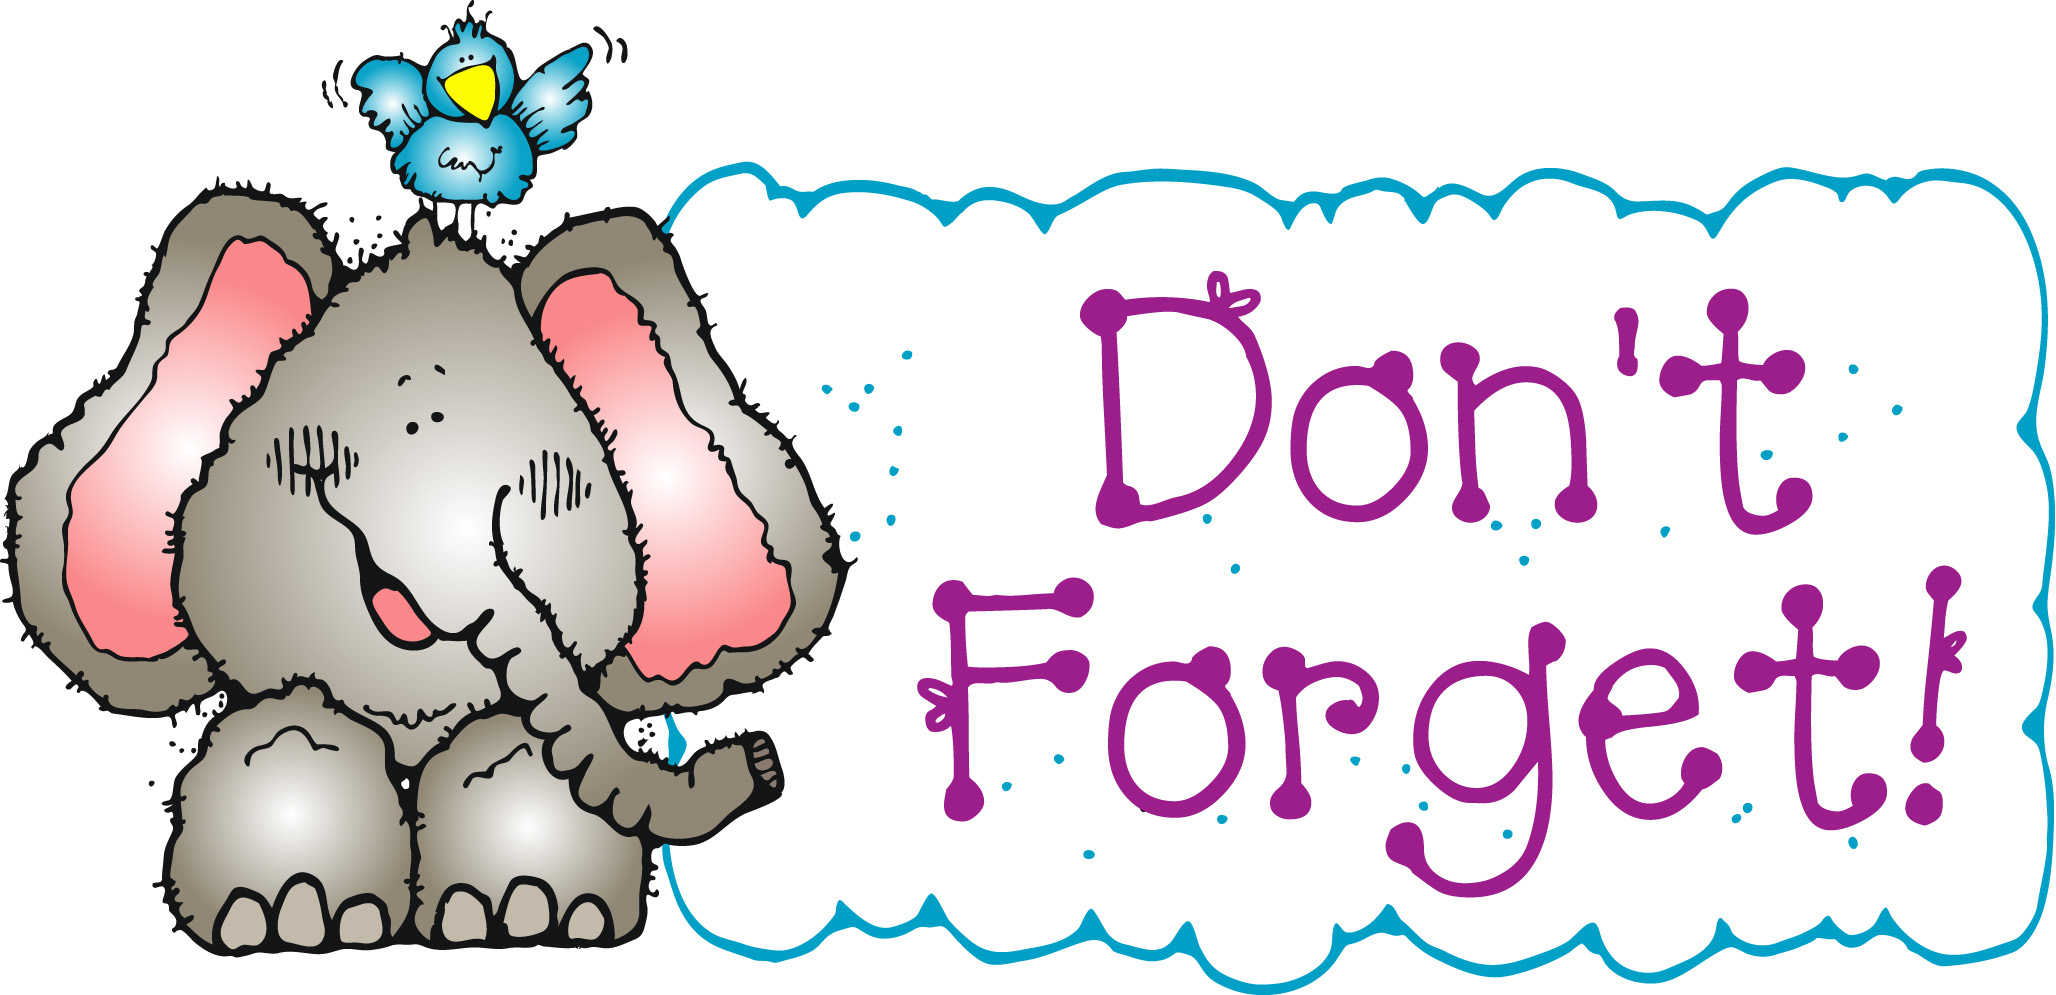 clipart on reminders - photo #9